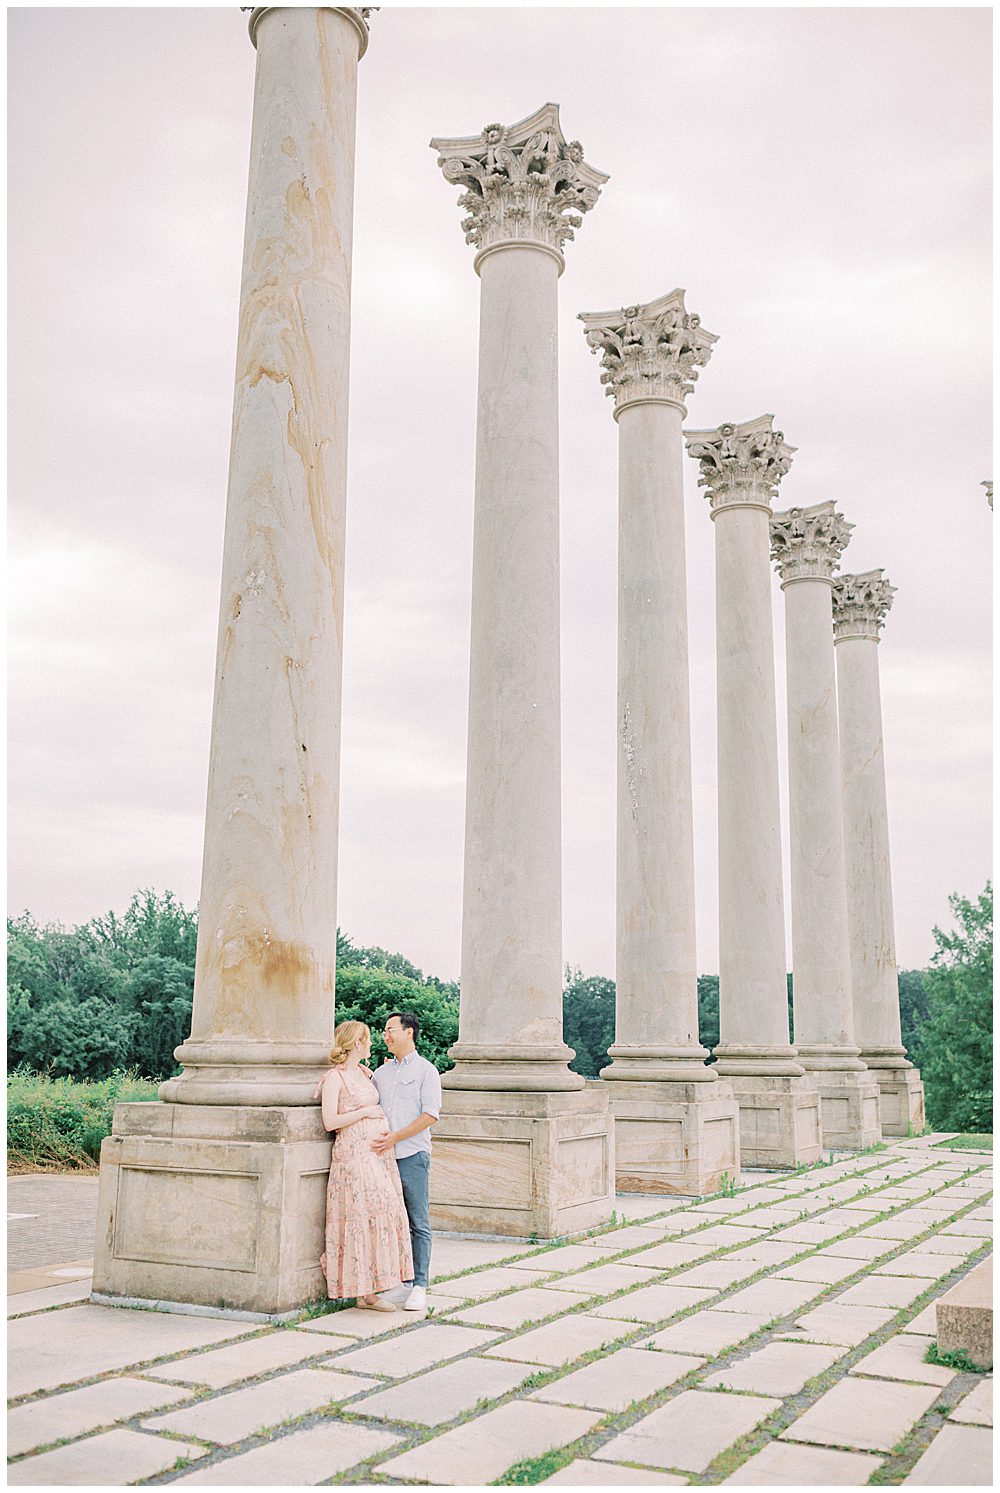 Expecting parents lean against National Arboretum columns looking at one another during their maternity session.